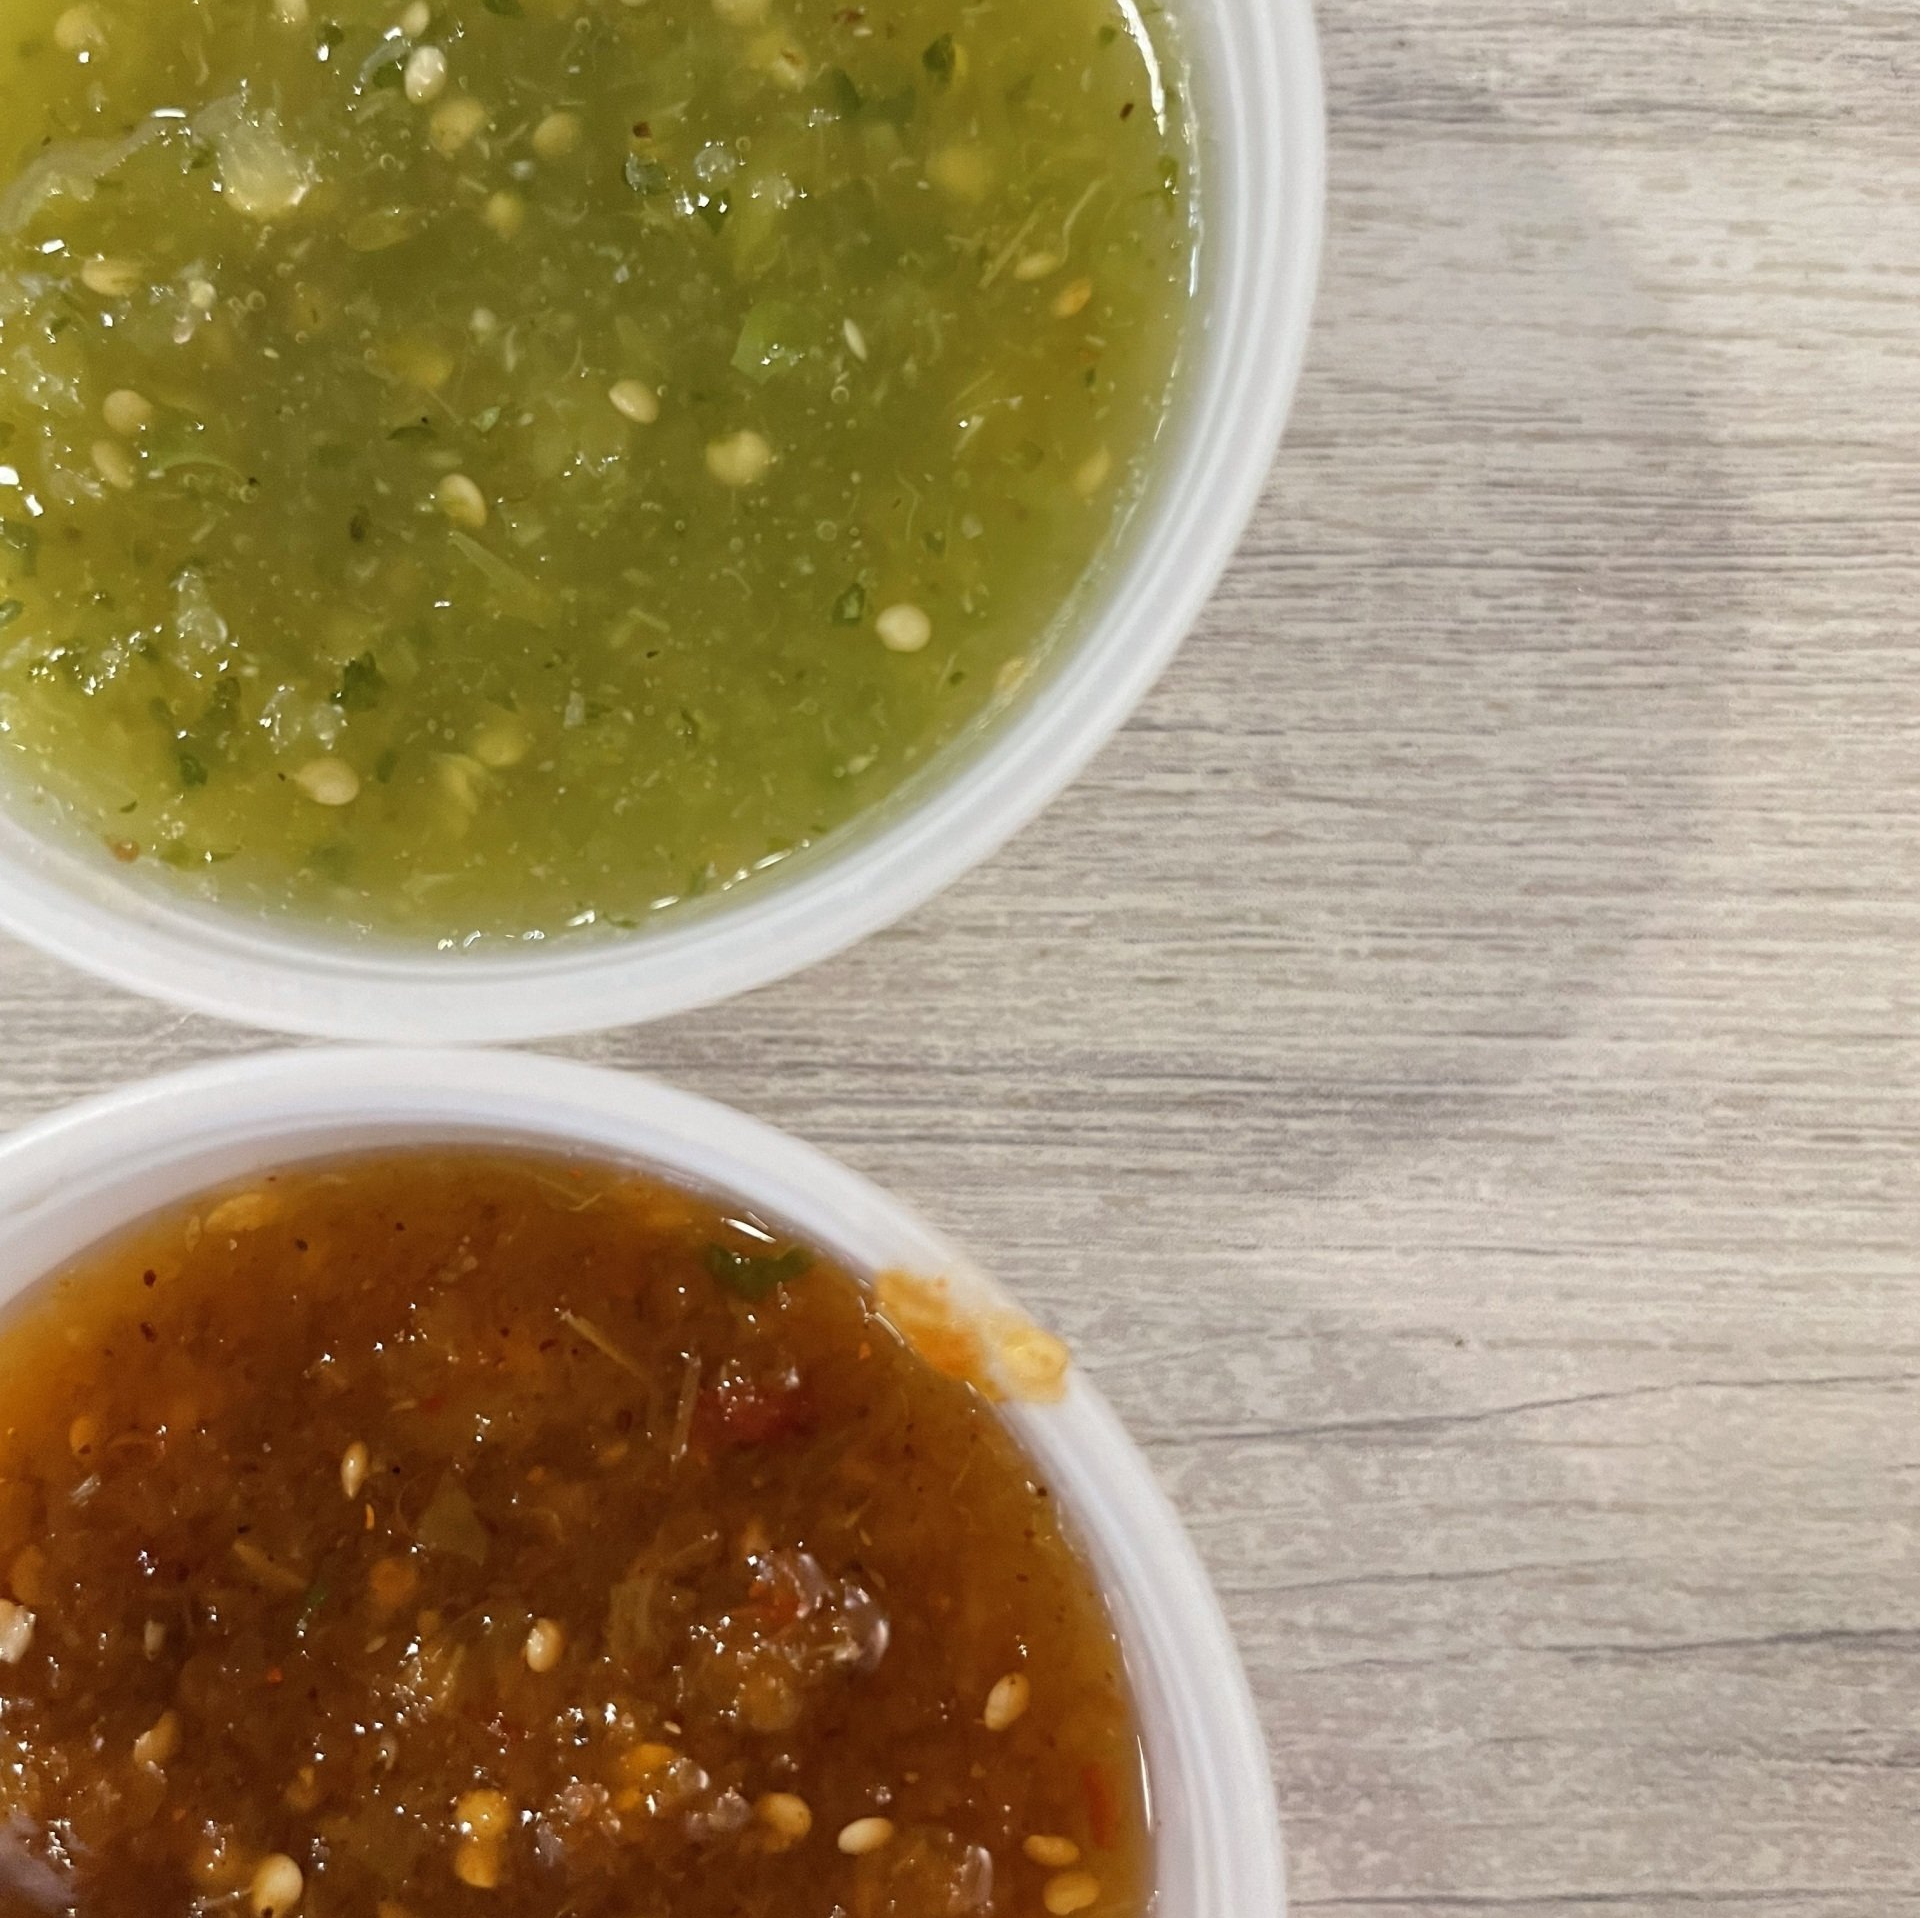 green and red free salsa from Moe's